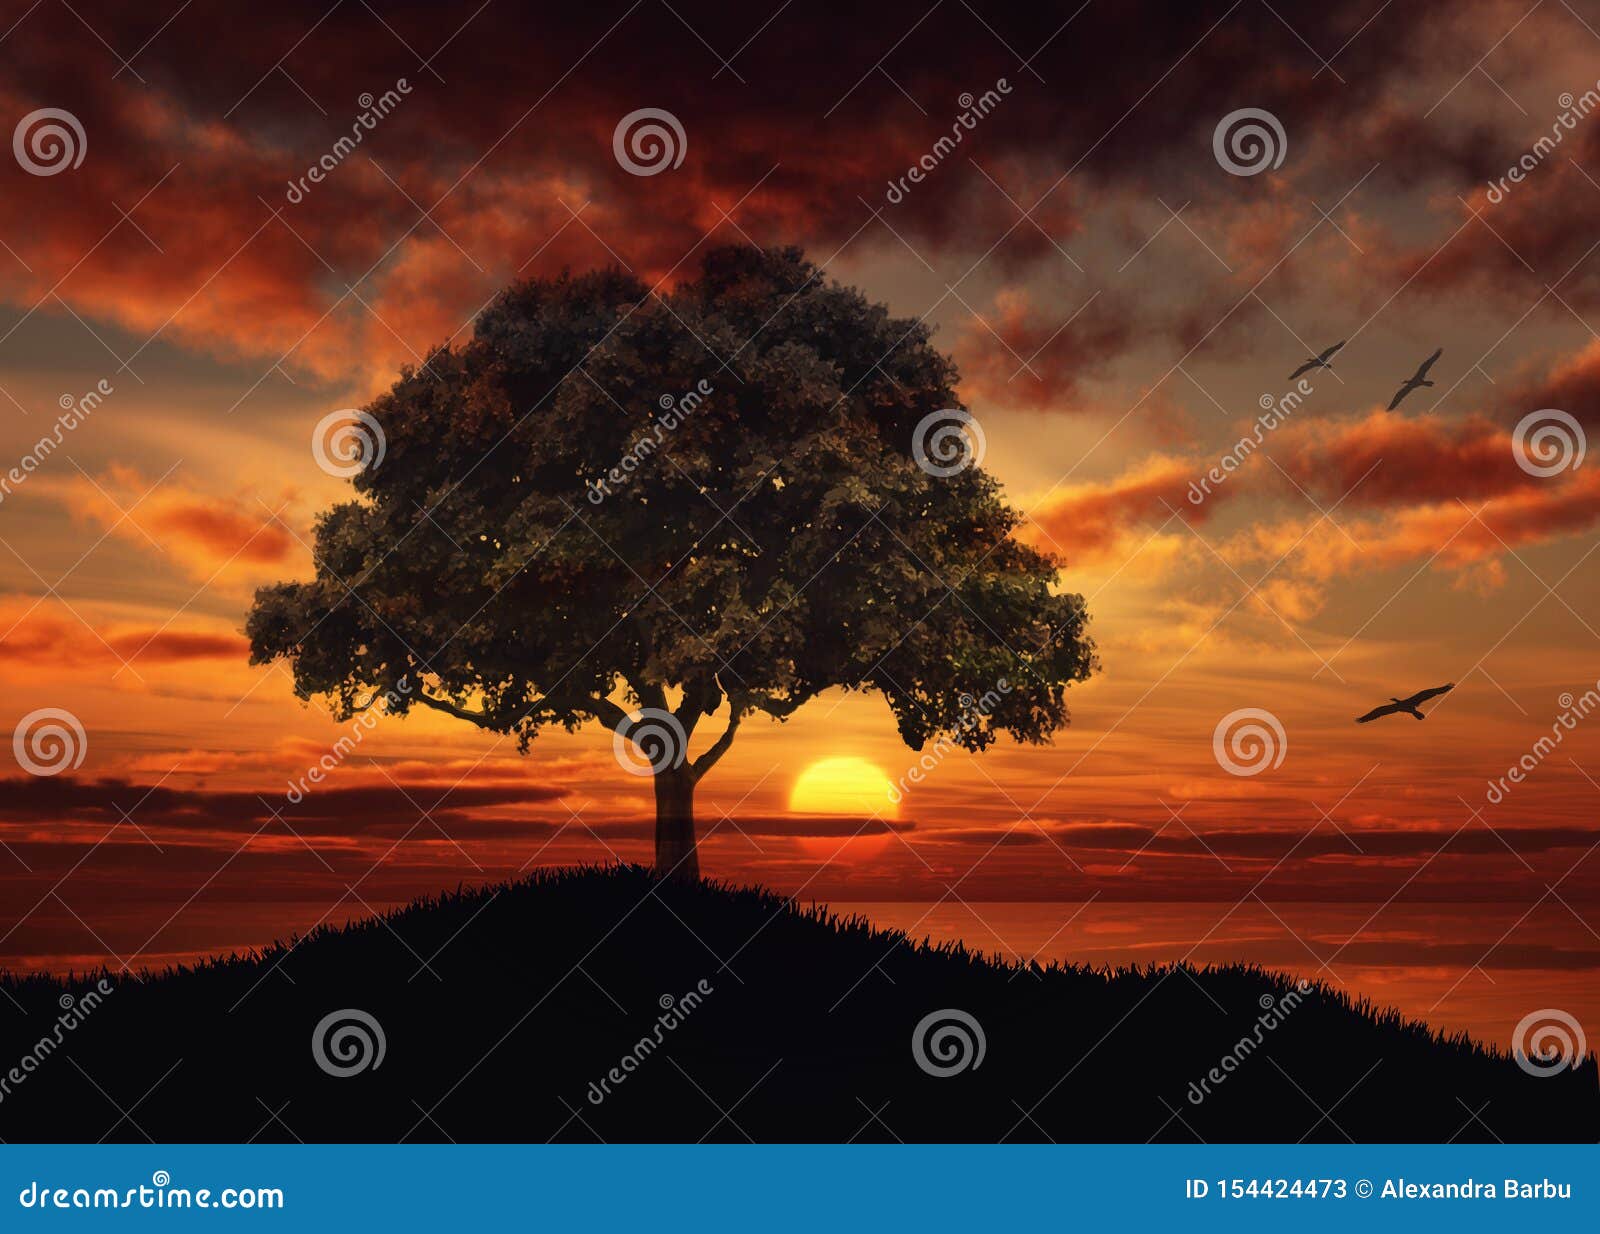 beautiful sunset over water tree silhouette nature landscape